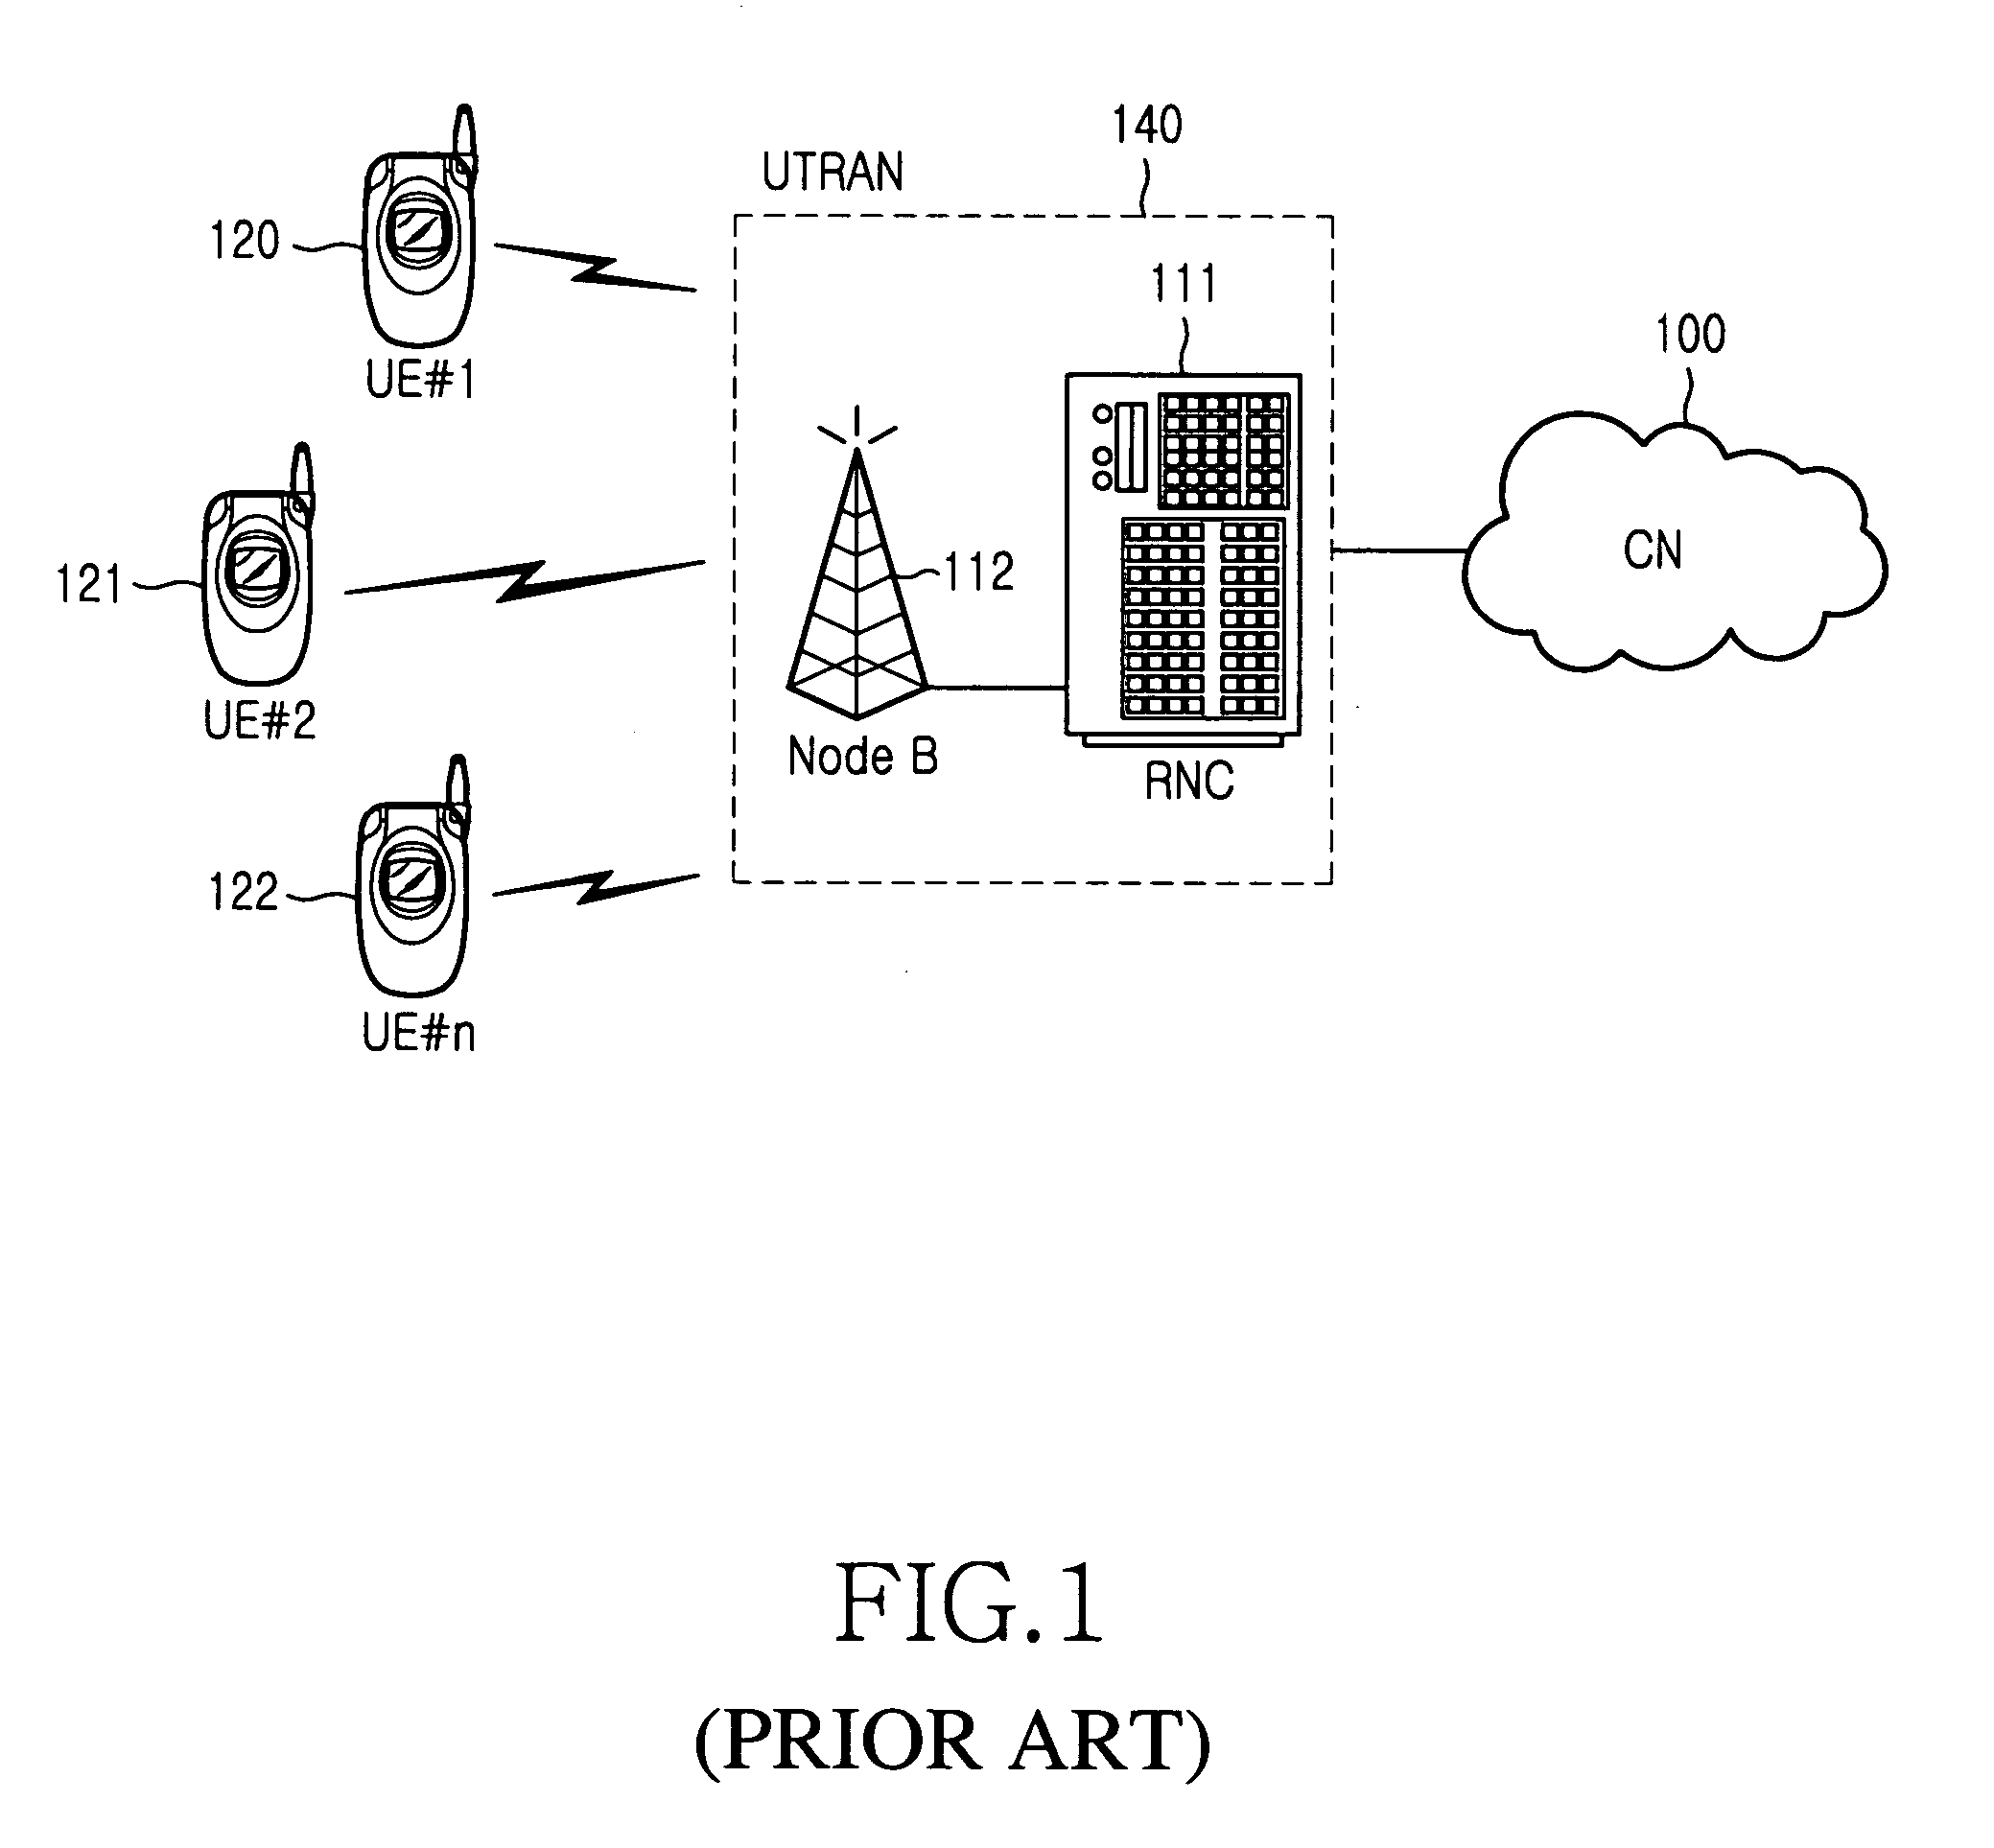 Method for reducing a false alarm probability for a notification for transmission of control information for an MBMS in a mobile communications system